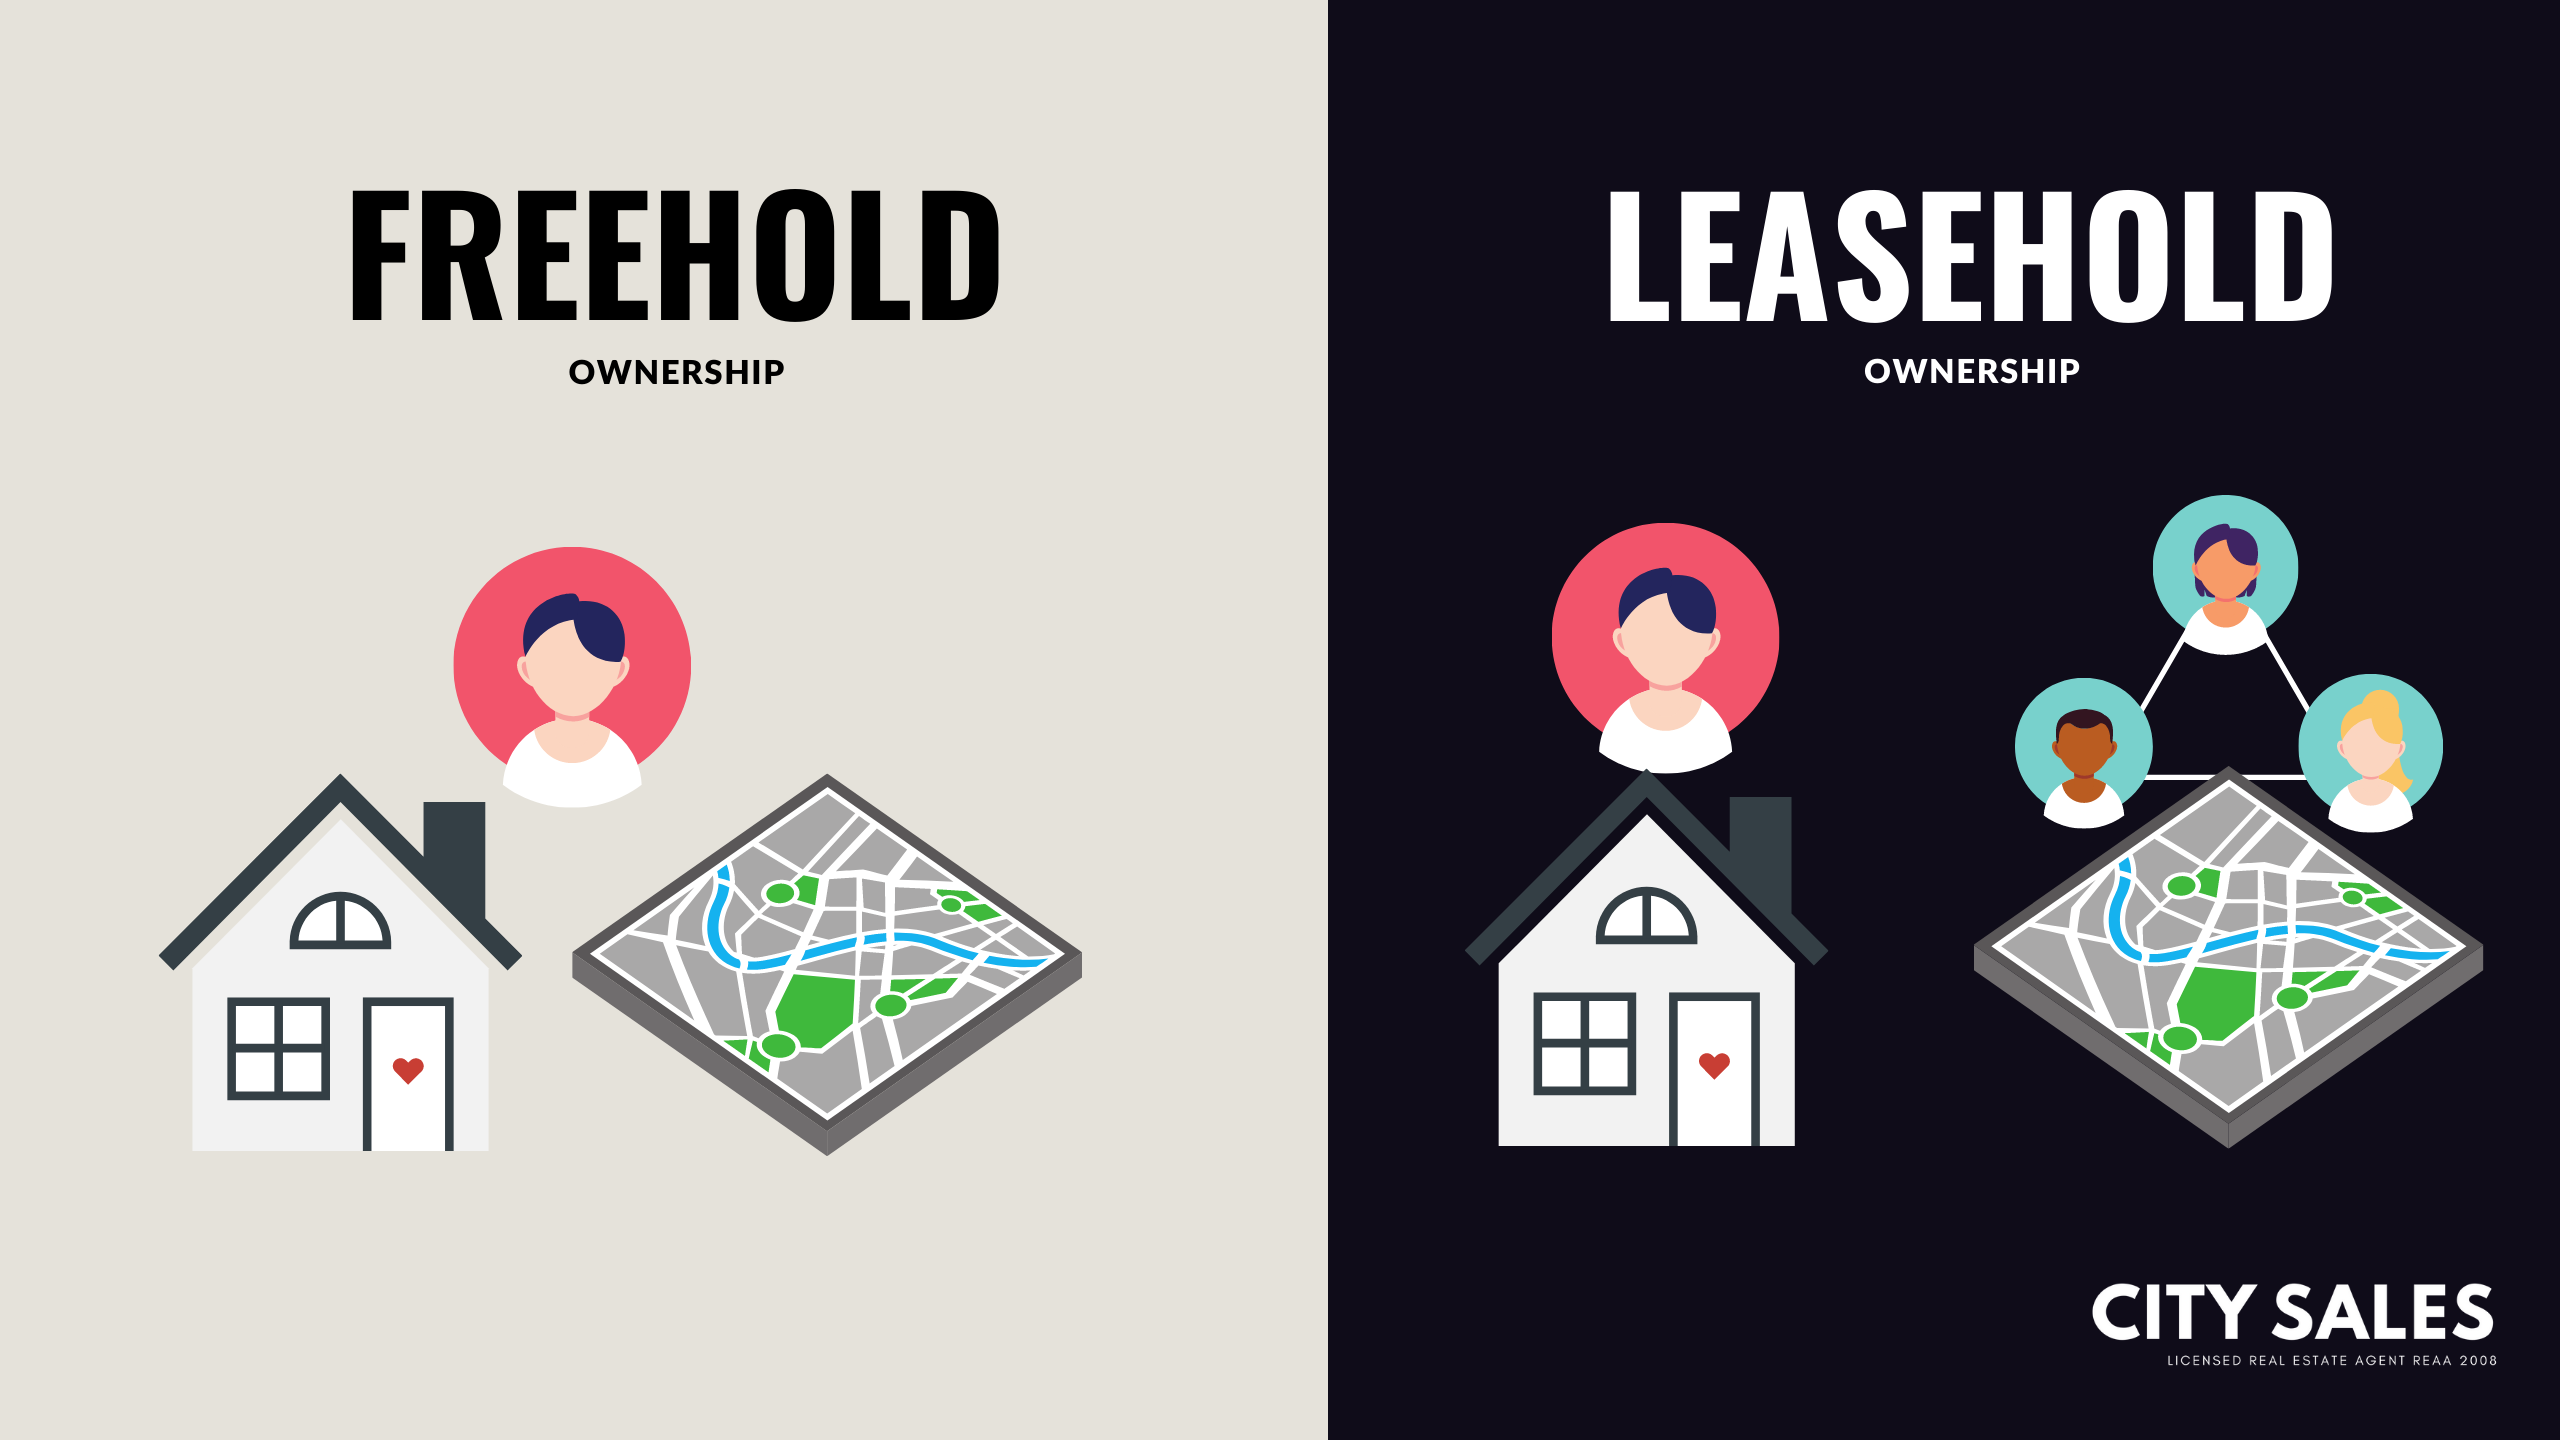 Leasehold vs freehold – the different forms of property ownership | City Sales Real Estate  Unsure about the difference between leasehold and freehold? Here's a breakdown of each, and when you might want to choose each.